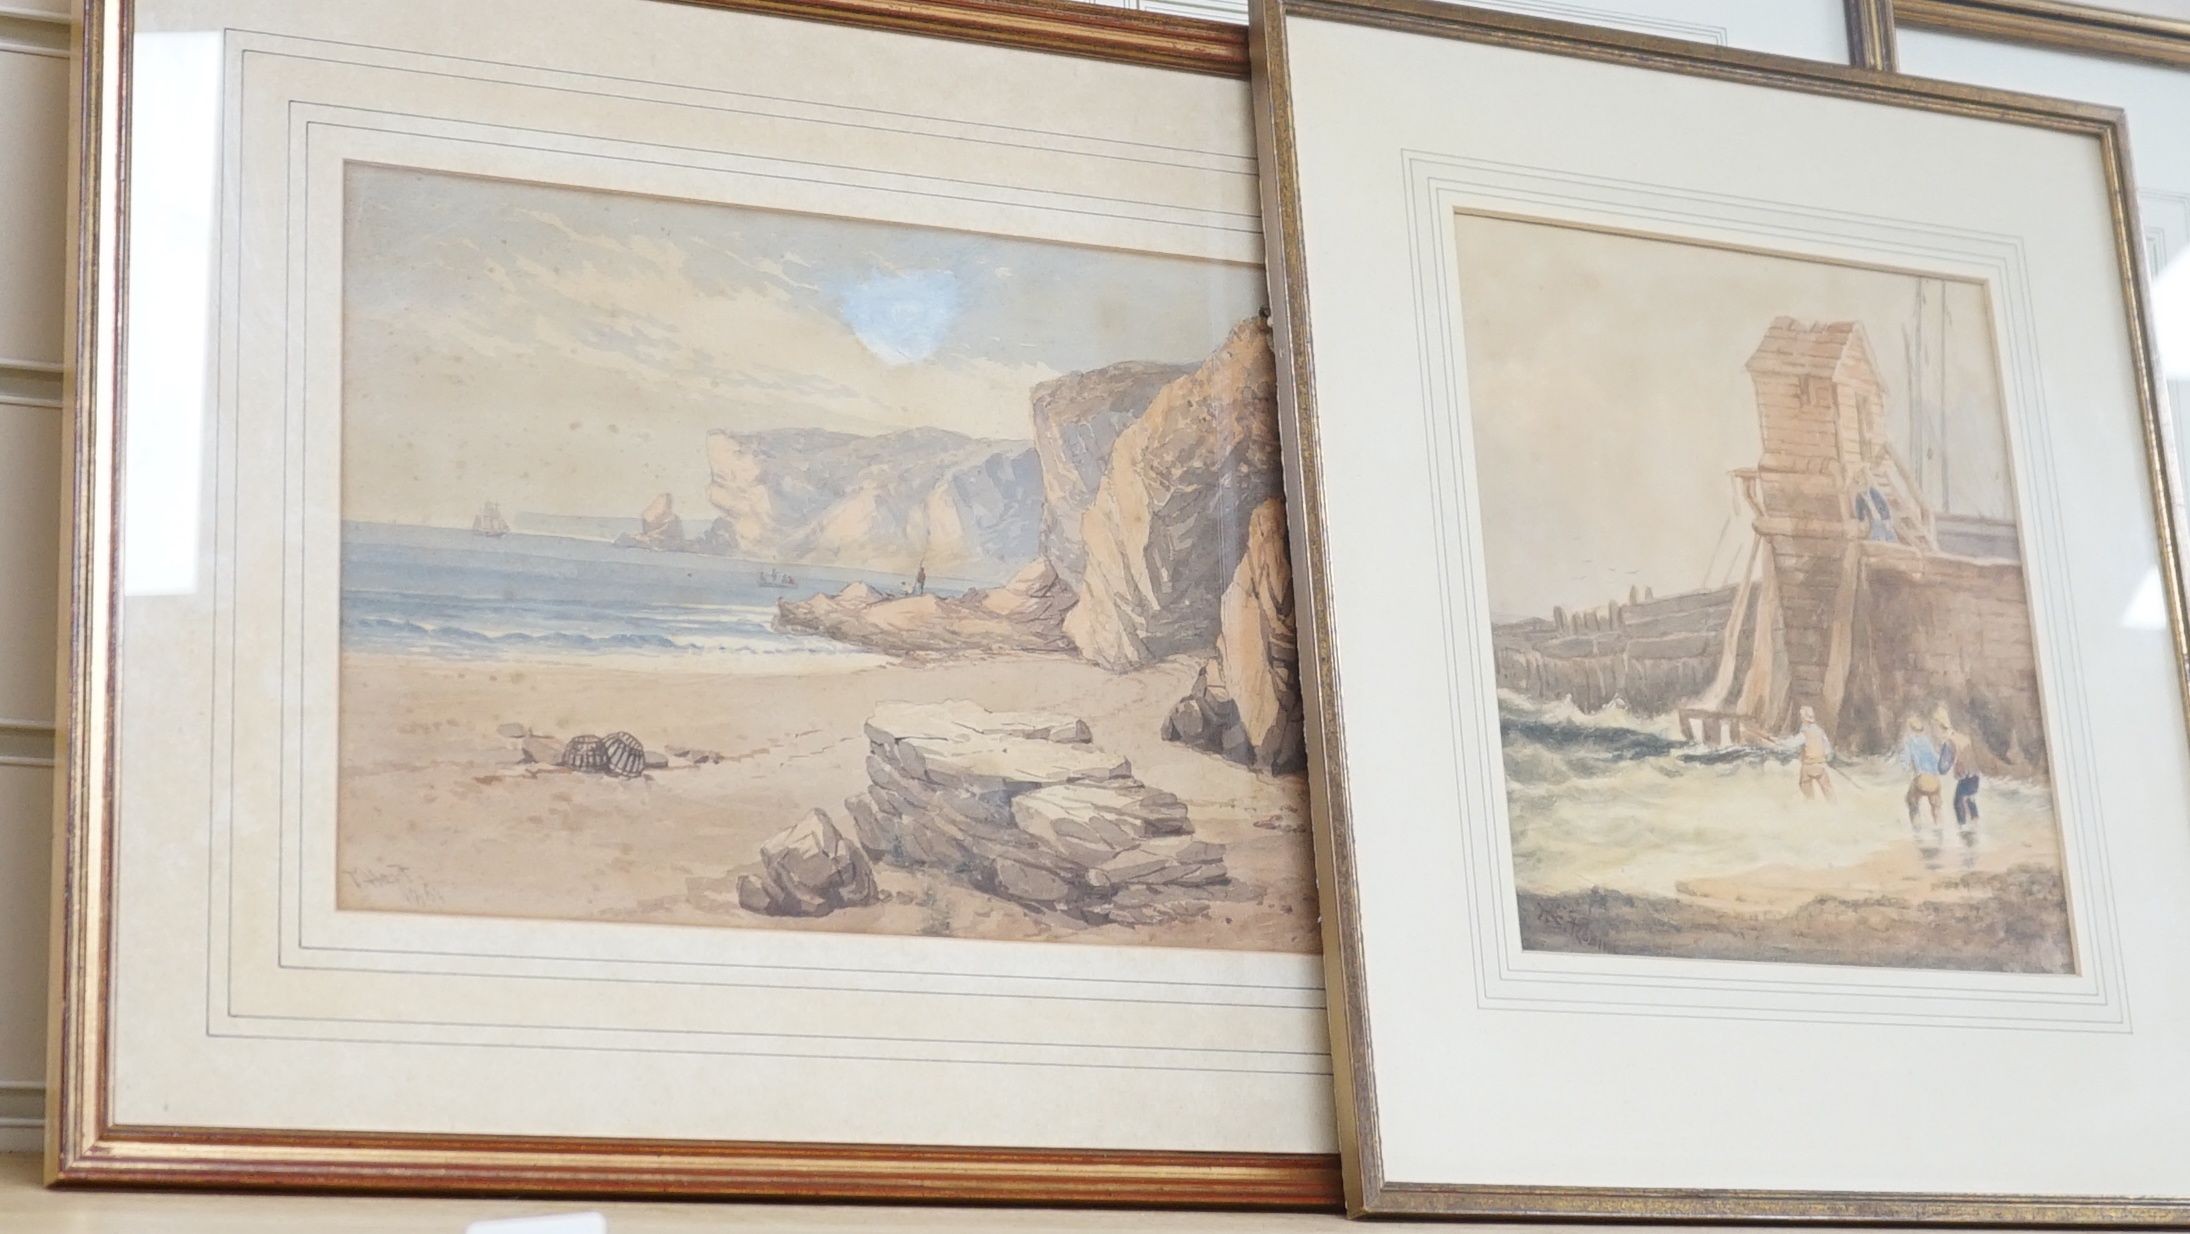 Two Cornish watercolour landscapes, Thos. Sewell Robins (1814-1880), Cornish Beach Scene, signed, 23 cm X 20.5 cm and Thomas Hart F.S.A., Coastal scene, signed and dated 1861, 21 cm X 32 cm